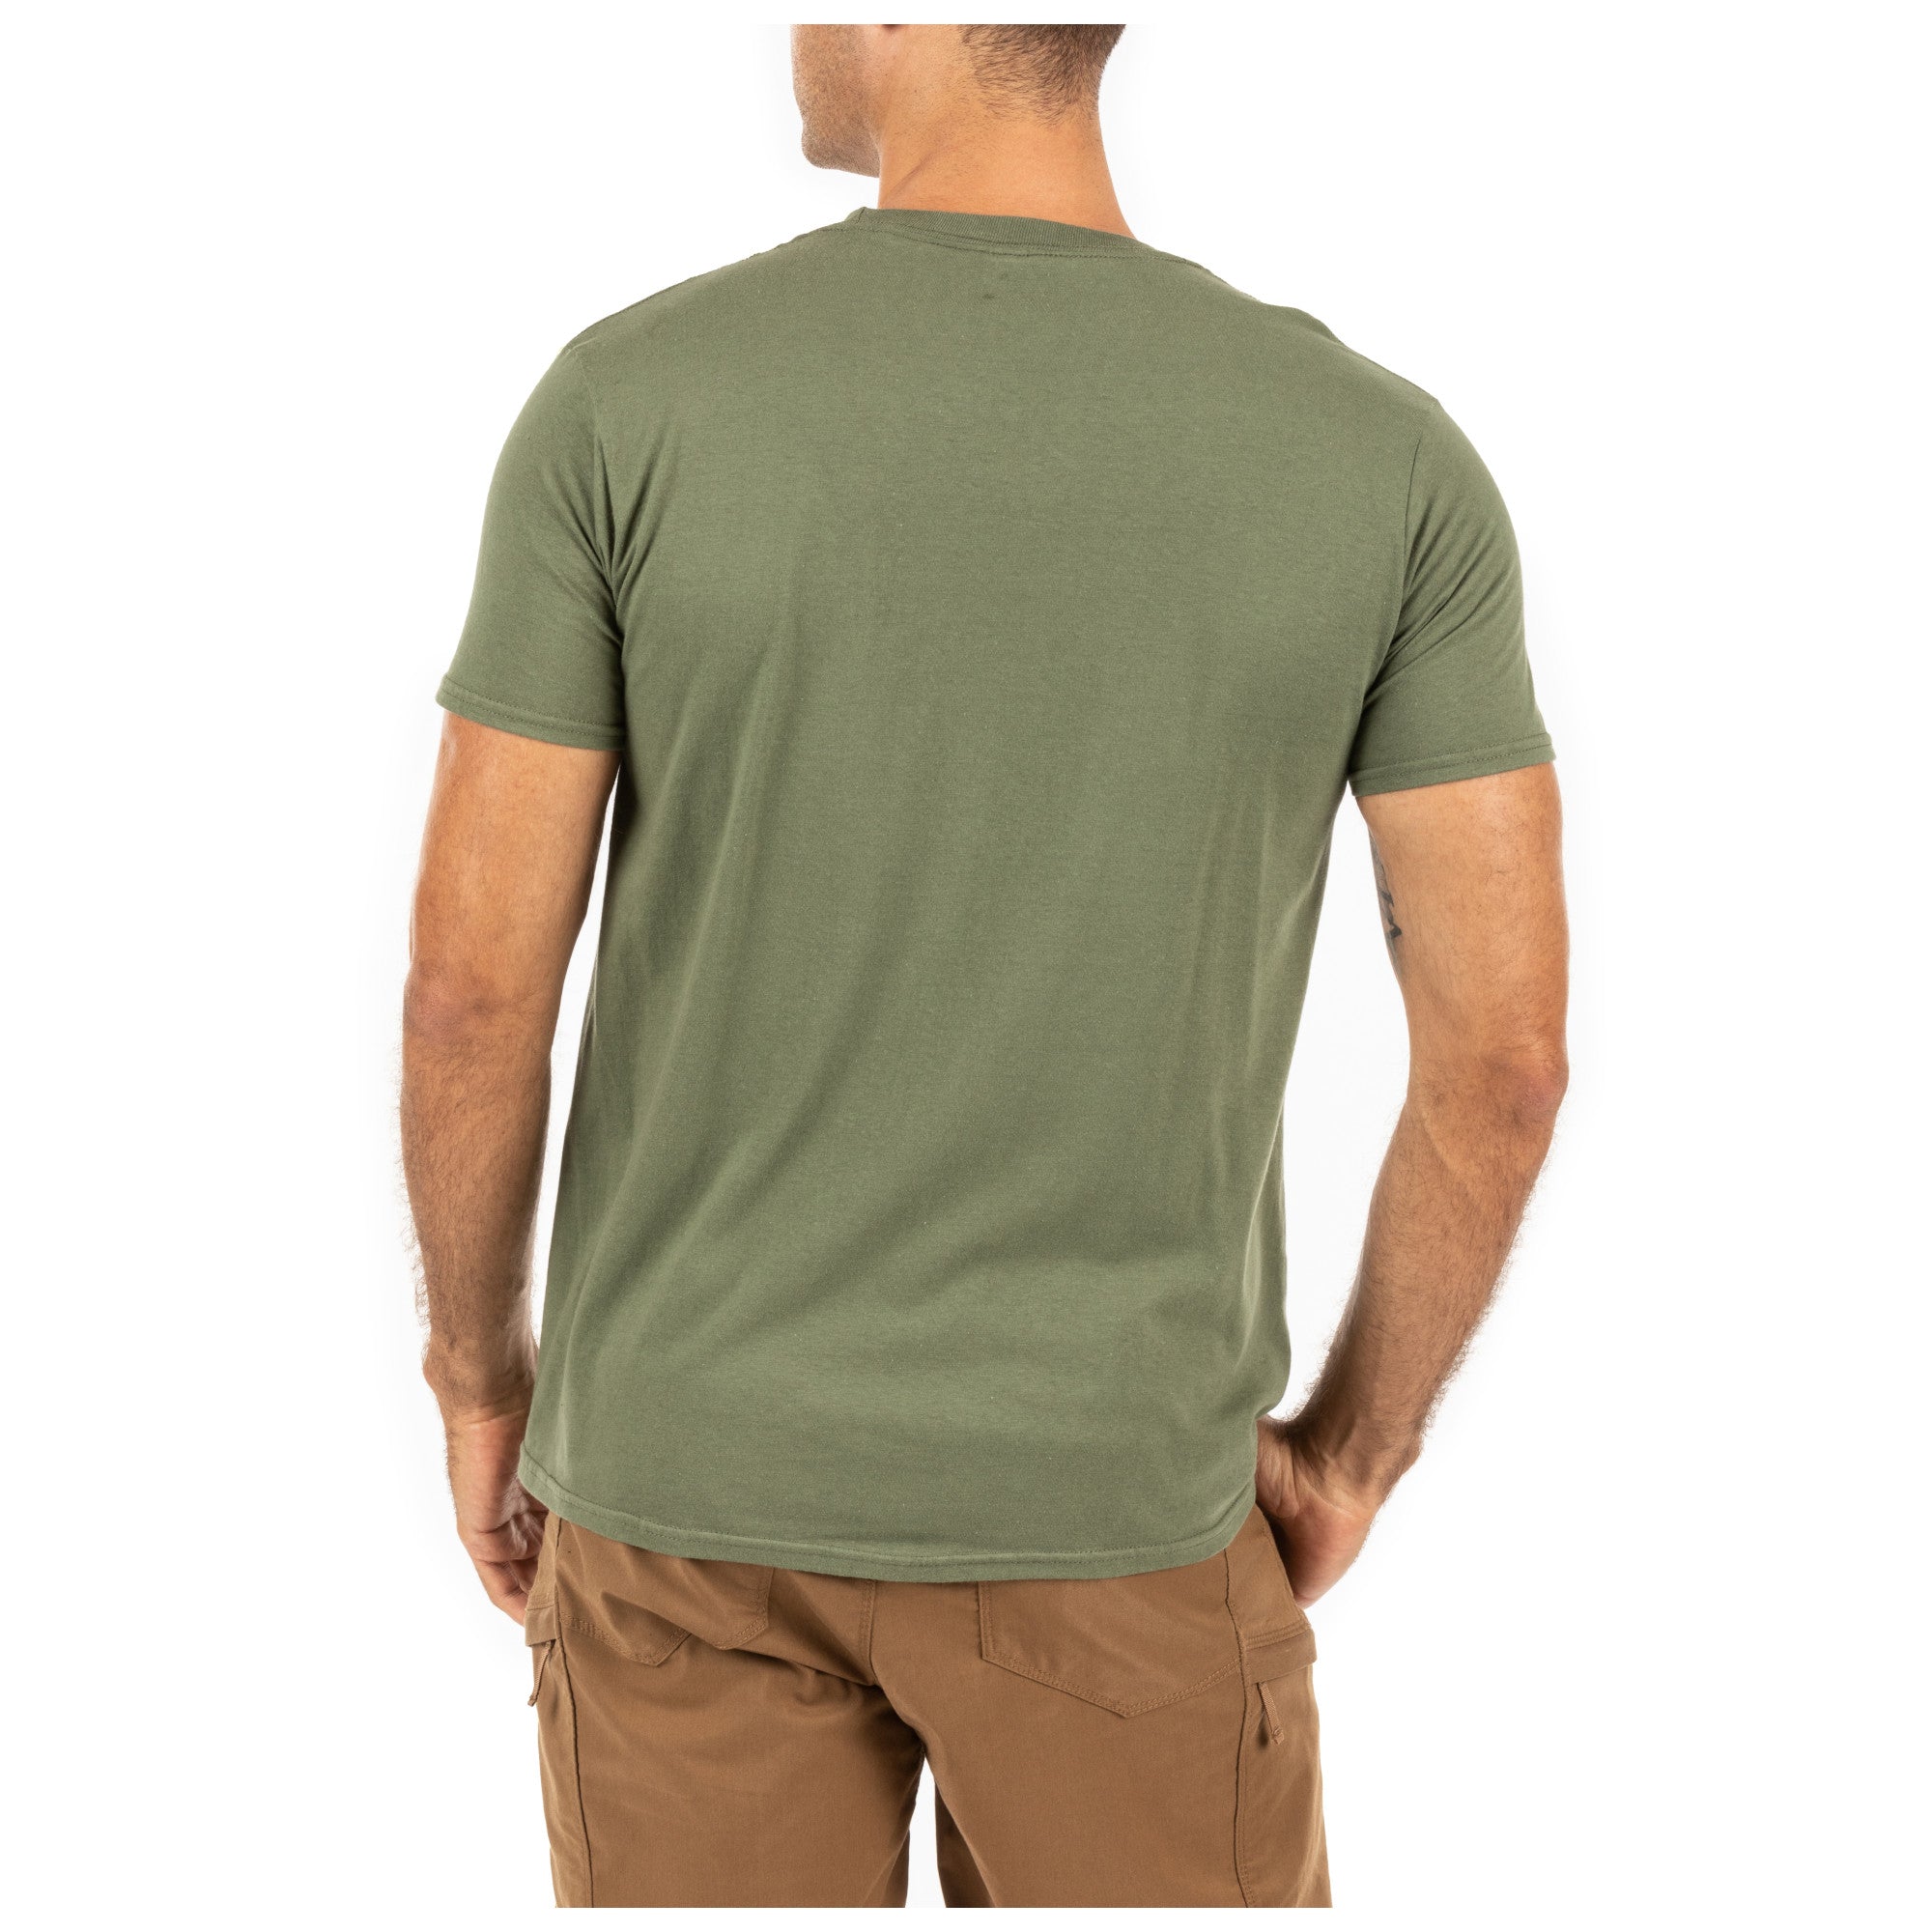 5.11 Tactical Sticks And Stones Tee - Military Green